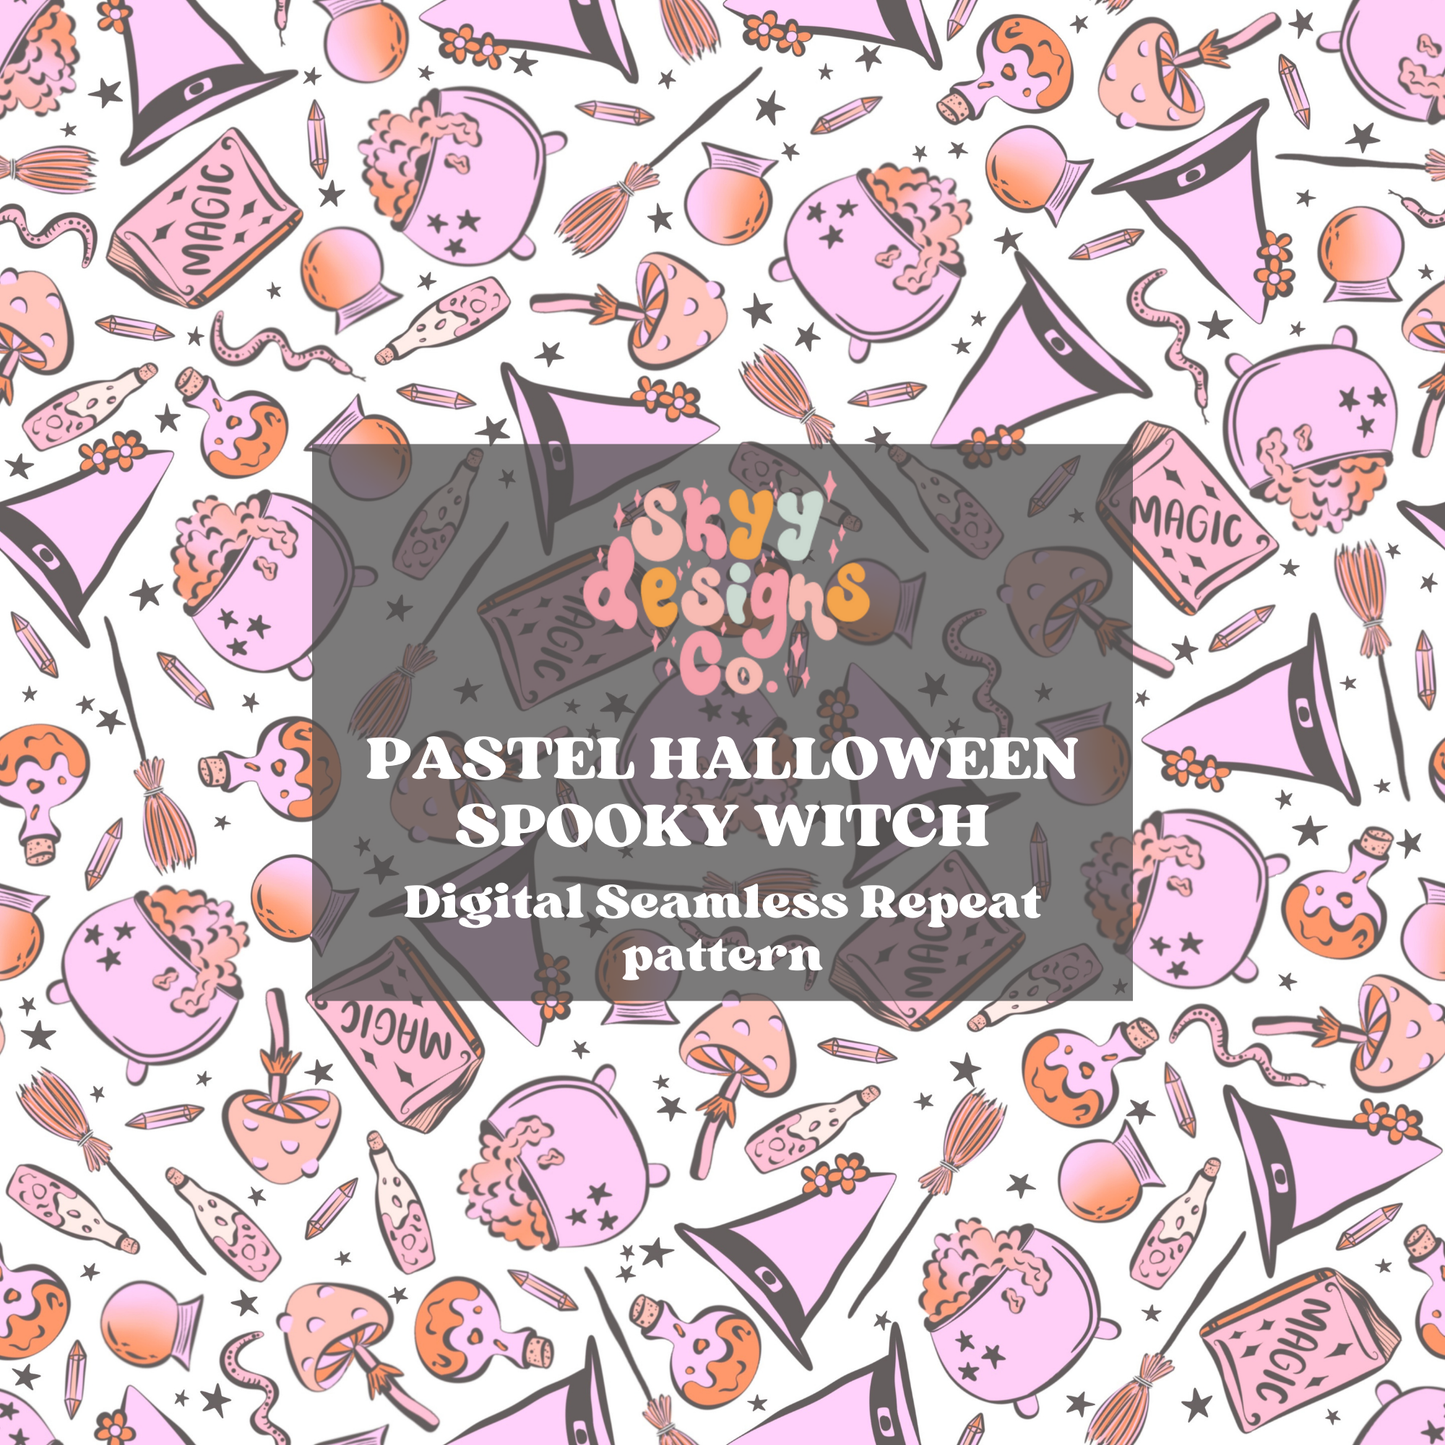 Boho spooky witch Halloween seamless surface pattern